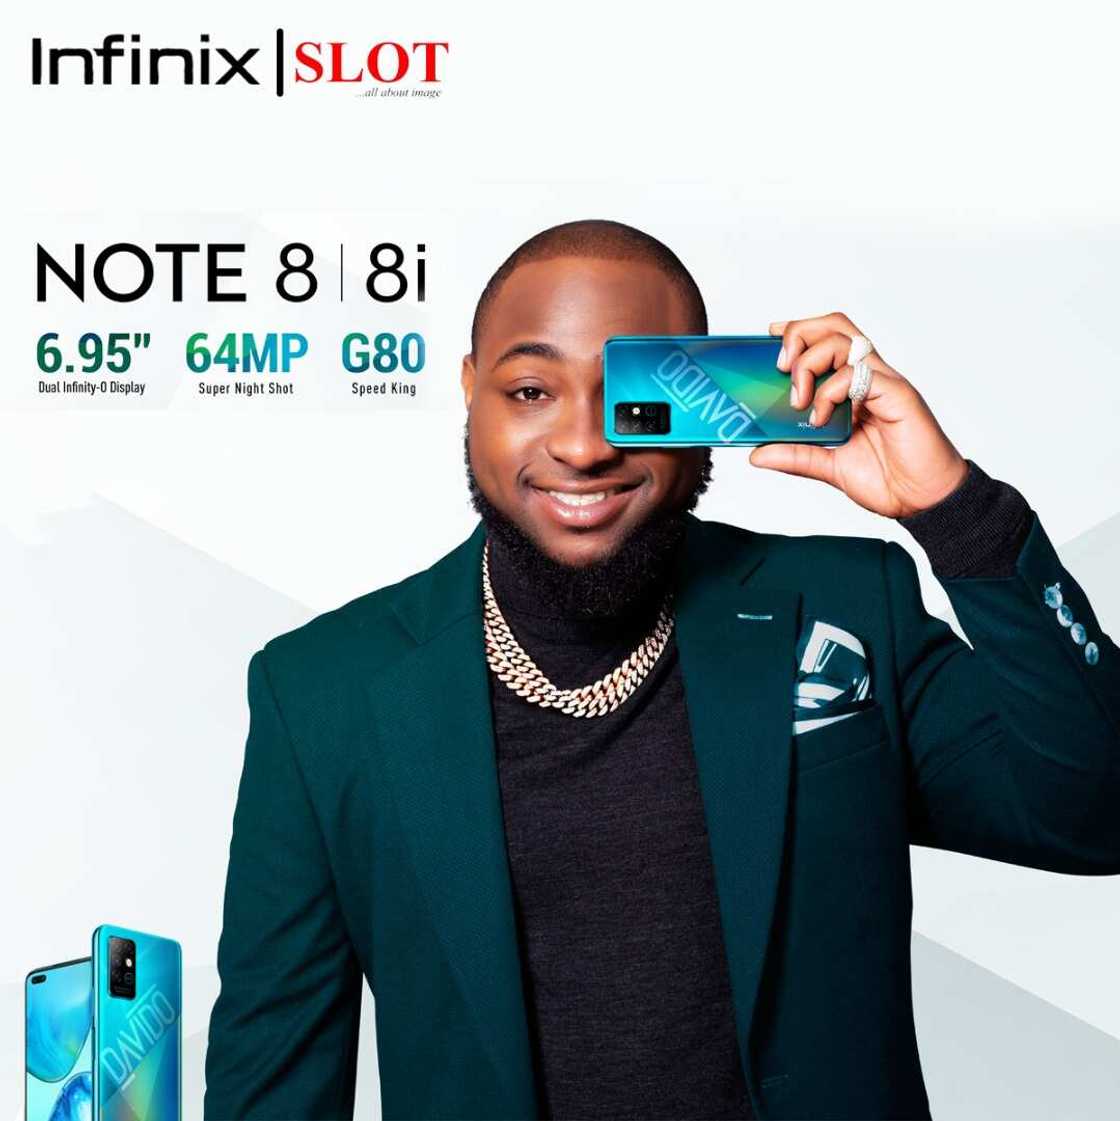 First celebrity Smartphone in Sub Sahara Africa: Davido’s special edition of Infinix NOTE 8